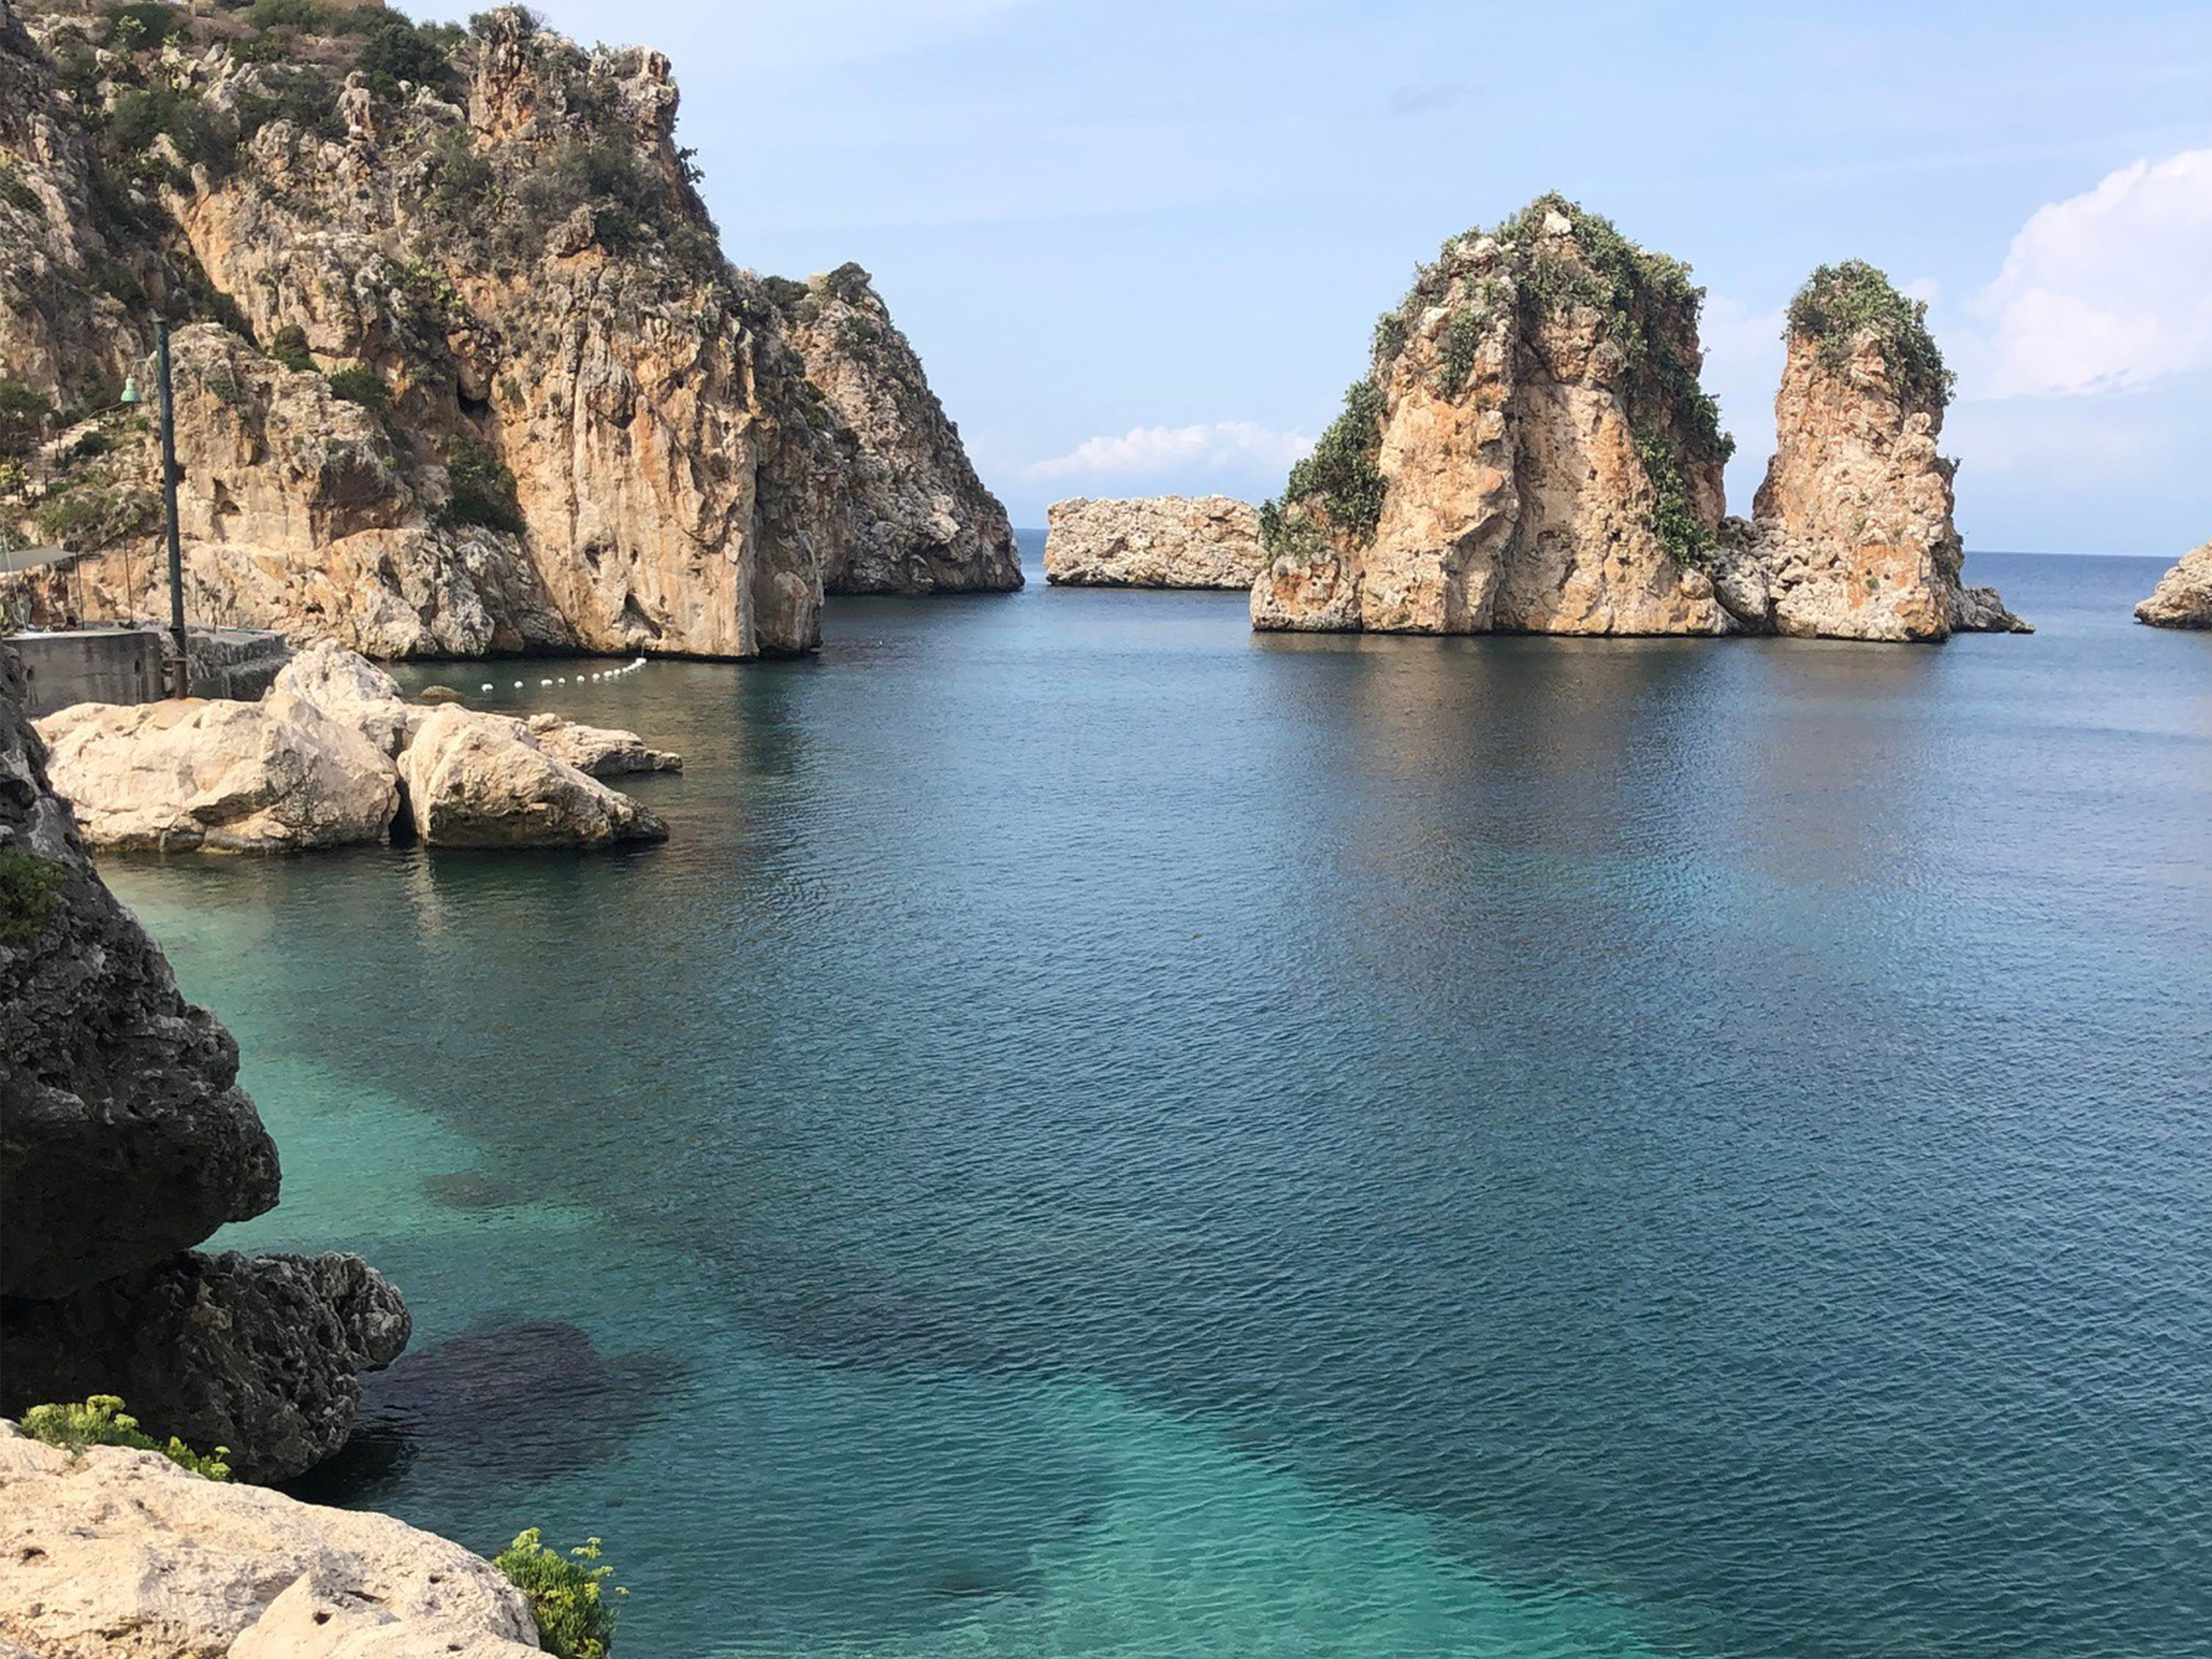 The scenic Sicilian town and location for our Resort Swim 2021 campaign